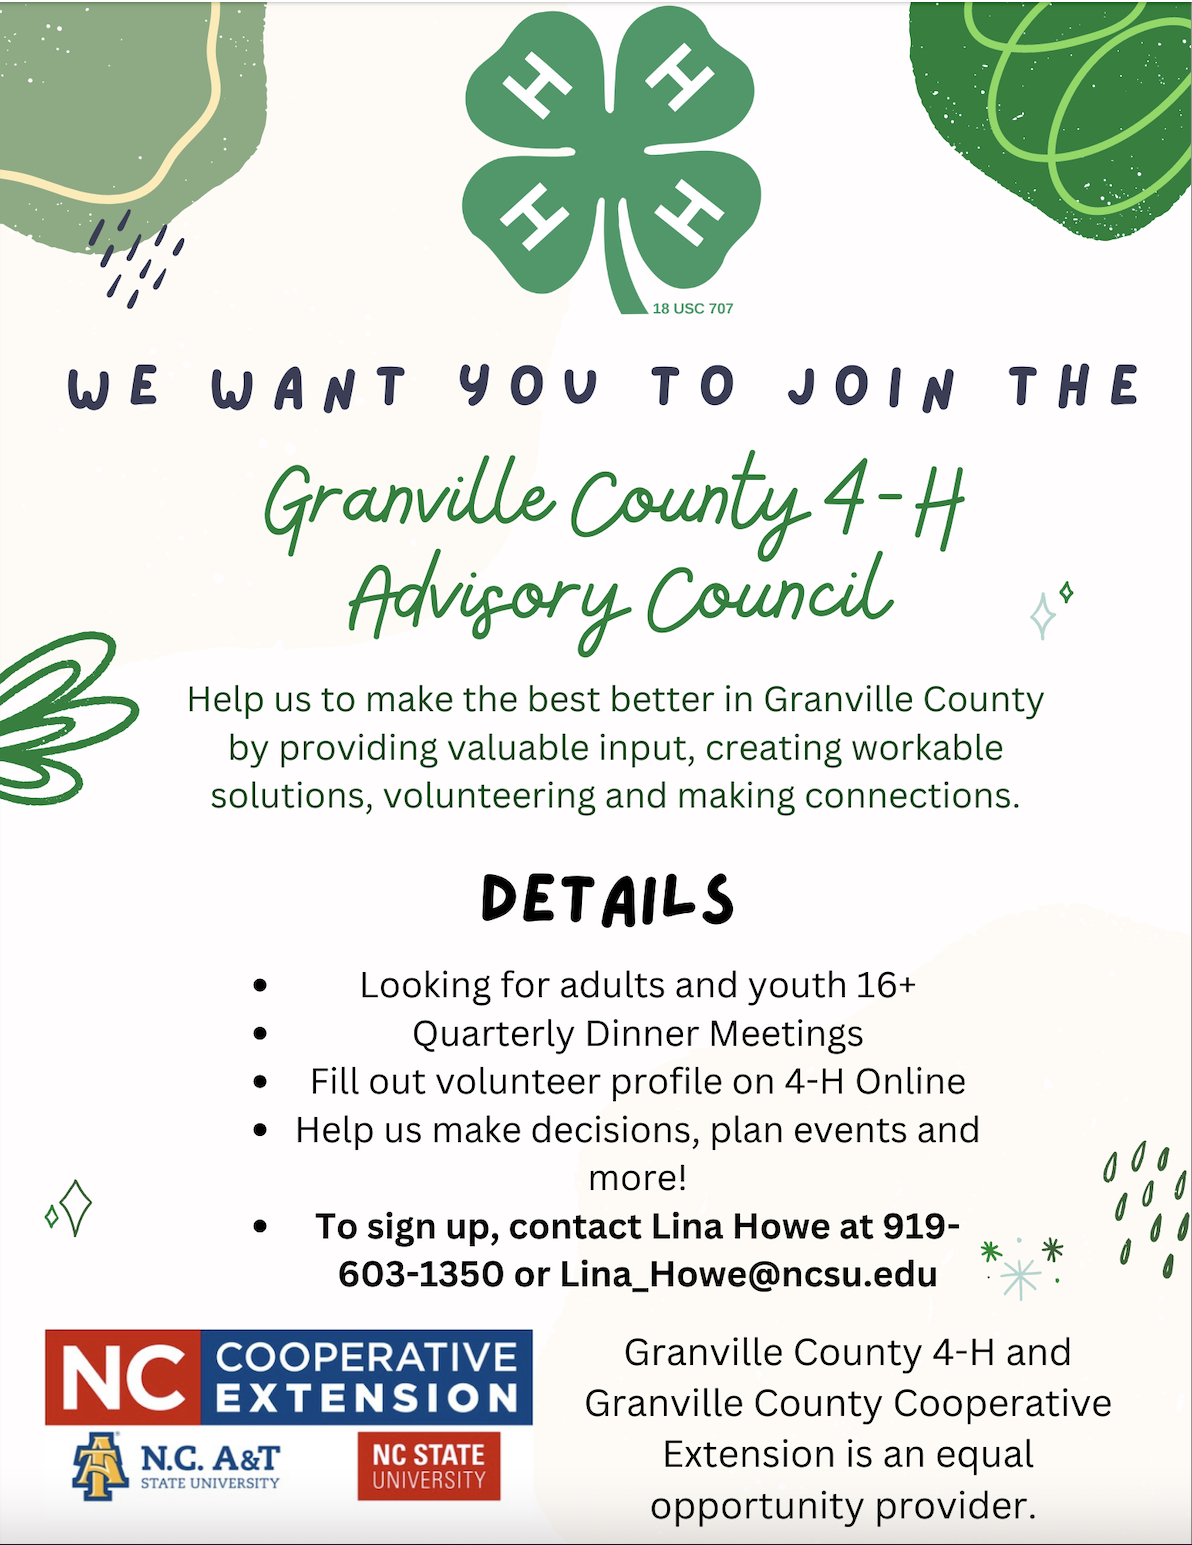 We want you to join the Granville County 4-H Advisory Council. Help us to make the best better in Granville County by providing valuable input, creating workable solutions, volunteering and making connections.